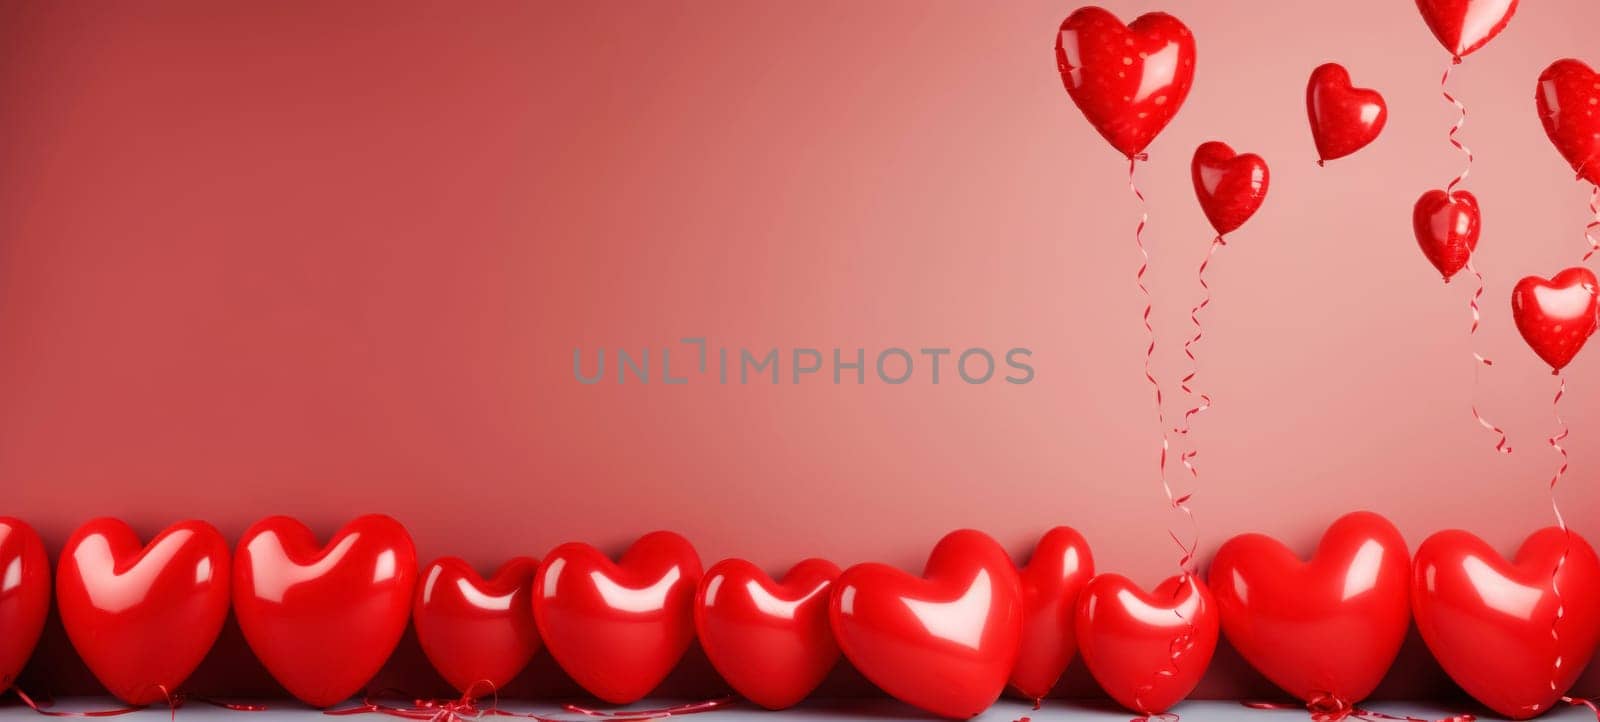 Red Heart Balloons Against Pink Background.